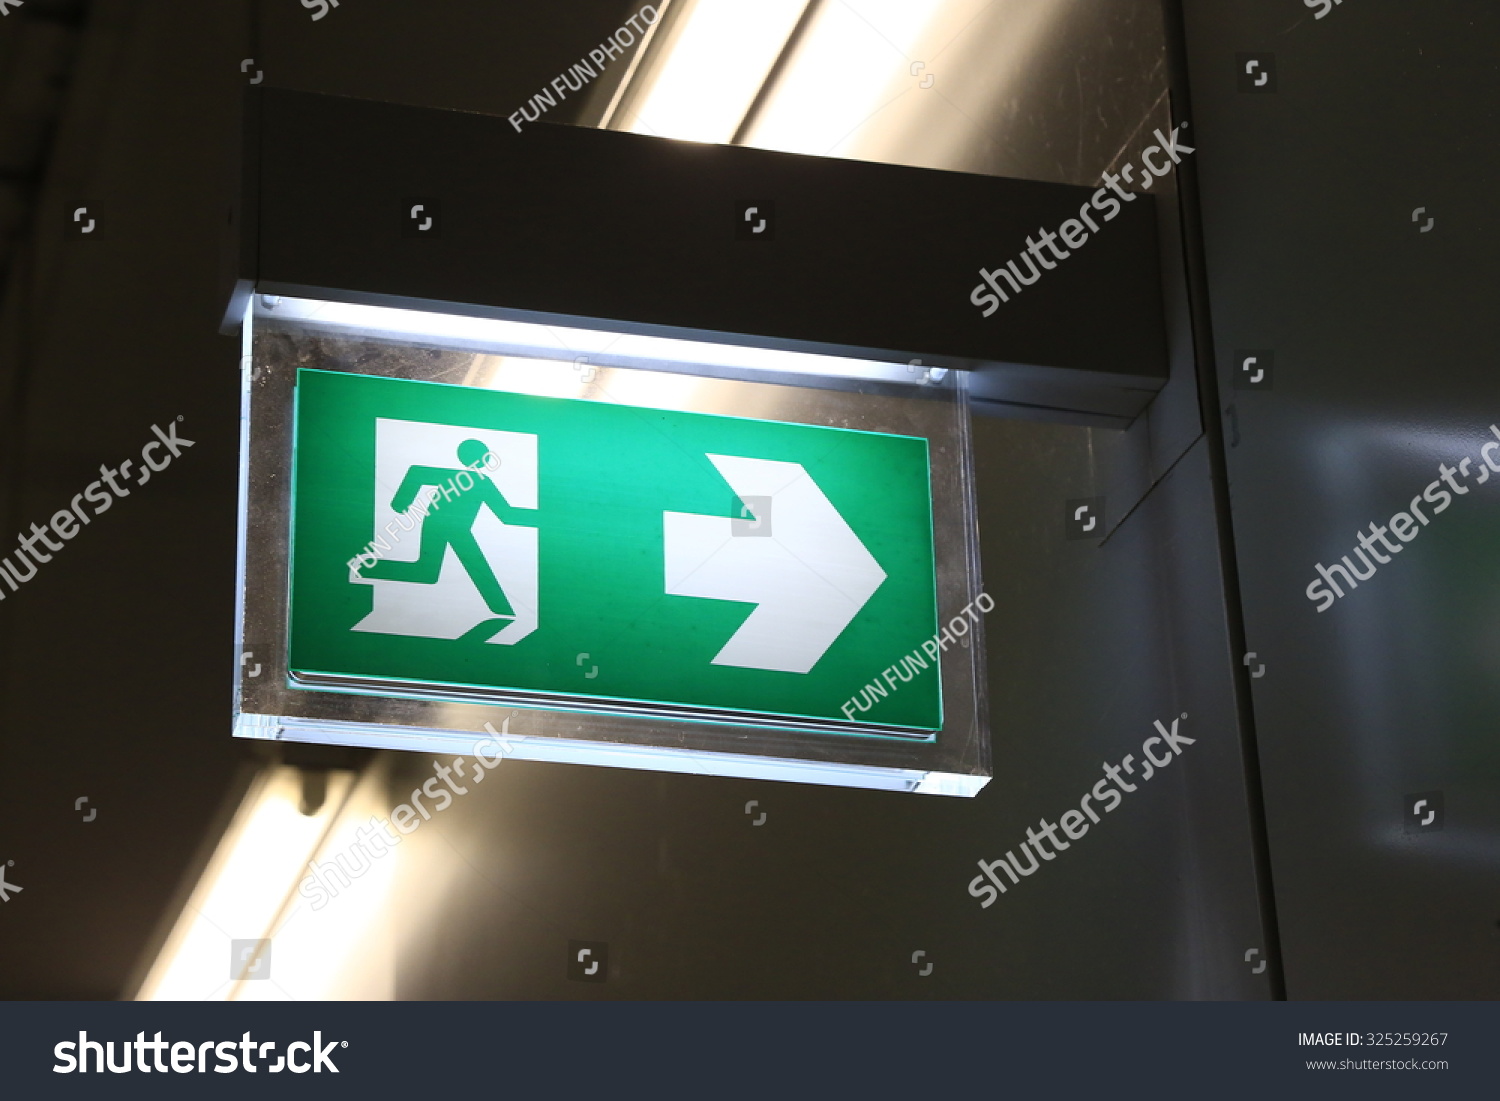 Emergency Exit Sign Stock Photo 325259267 - Shutterstock